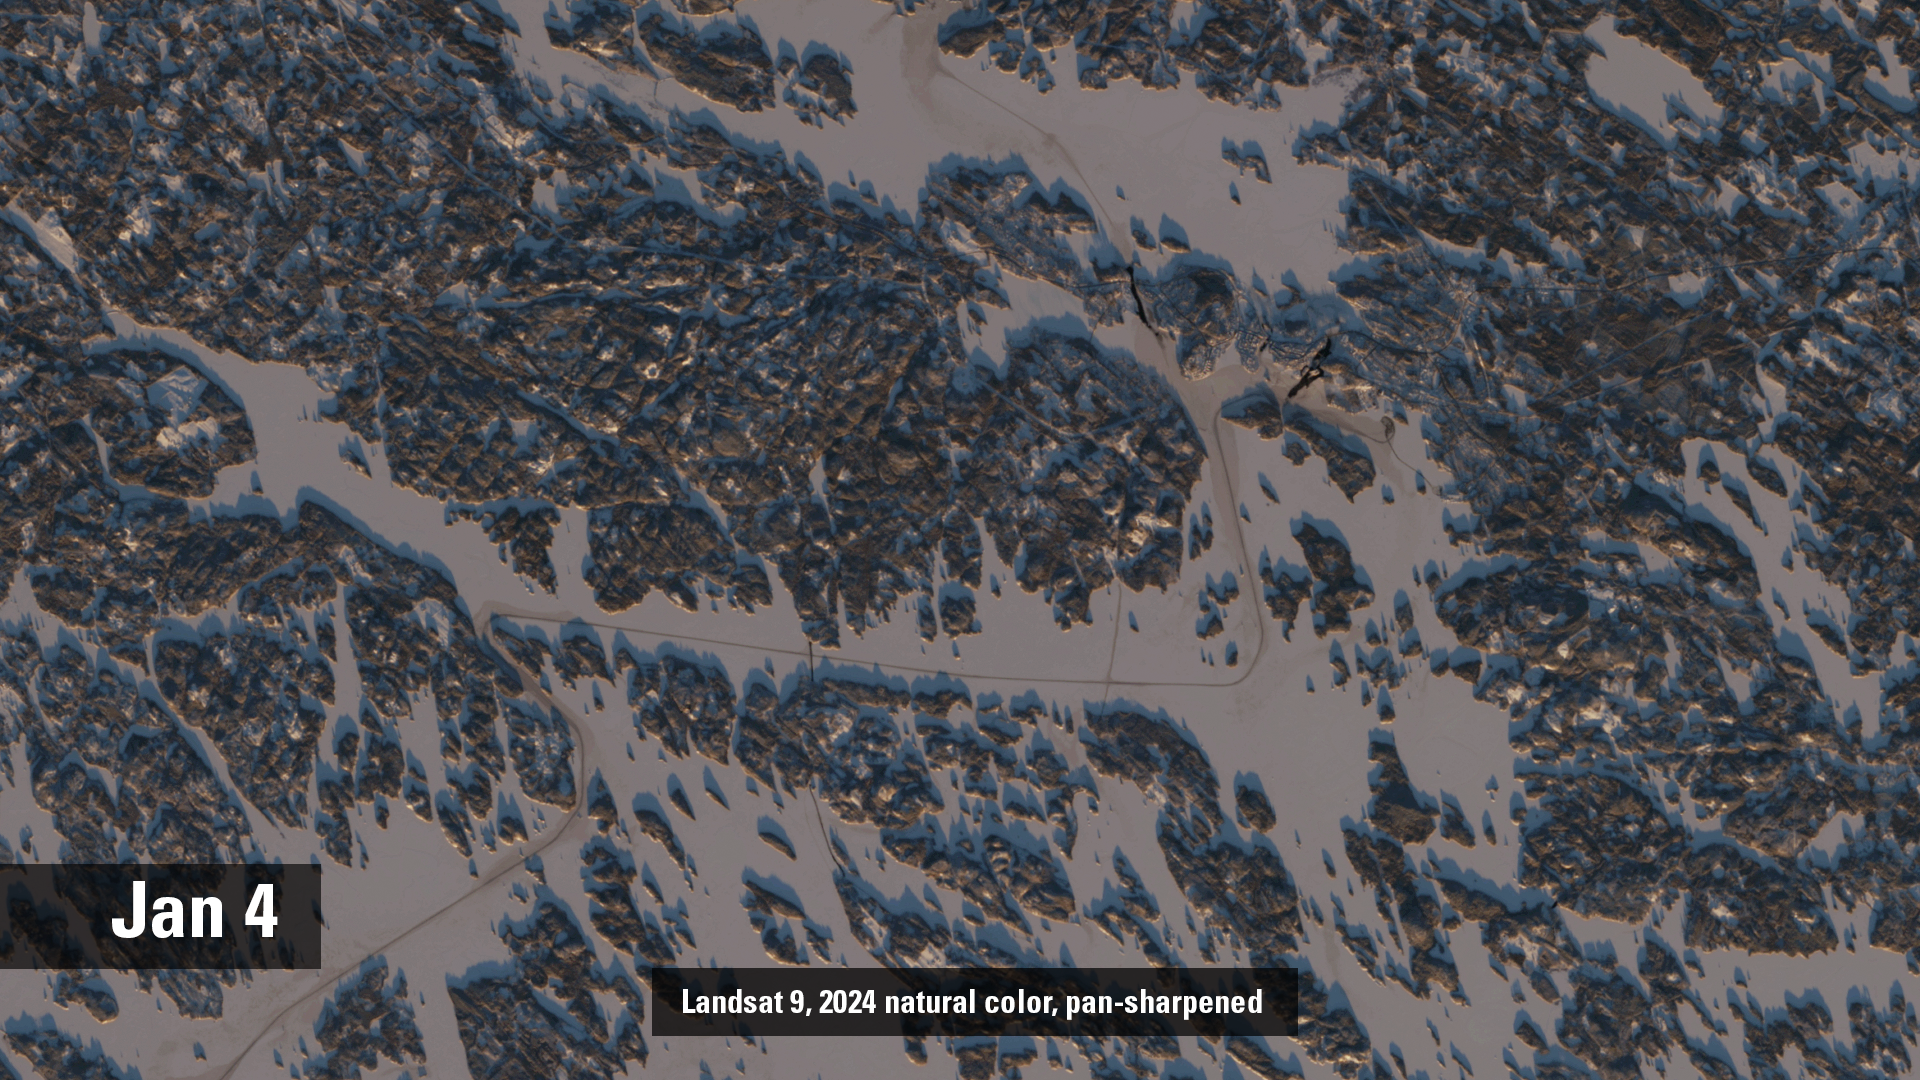 Ice Routes in Finland Revealed by Landsat before